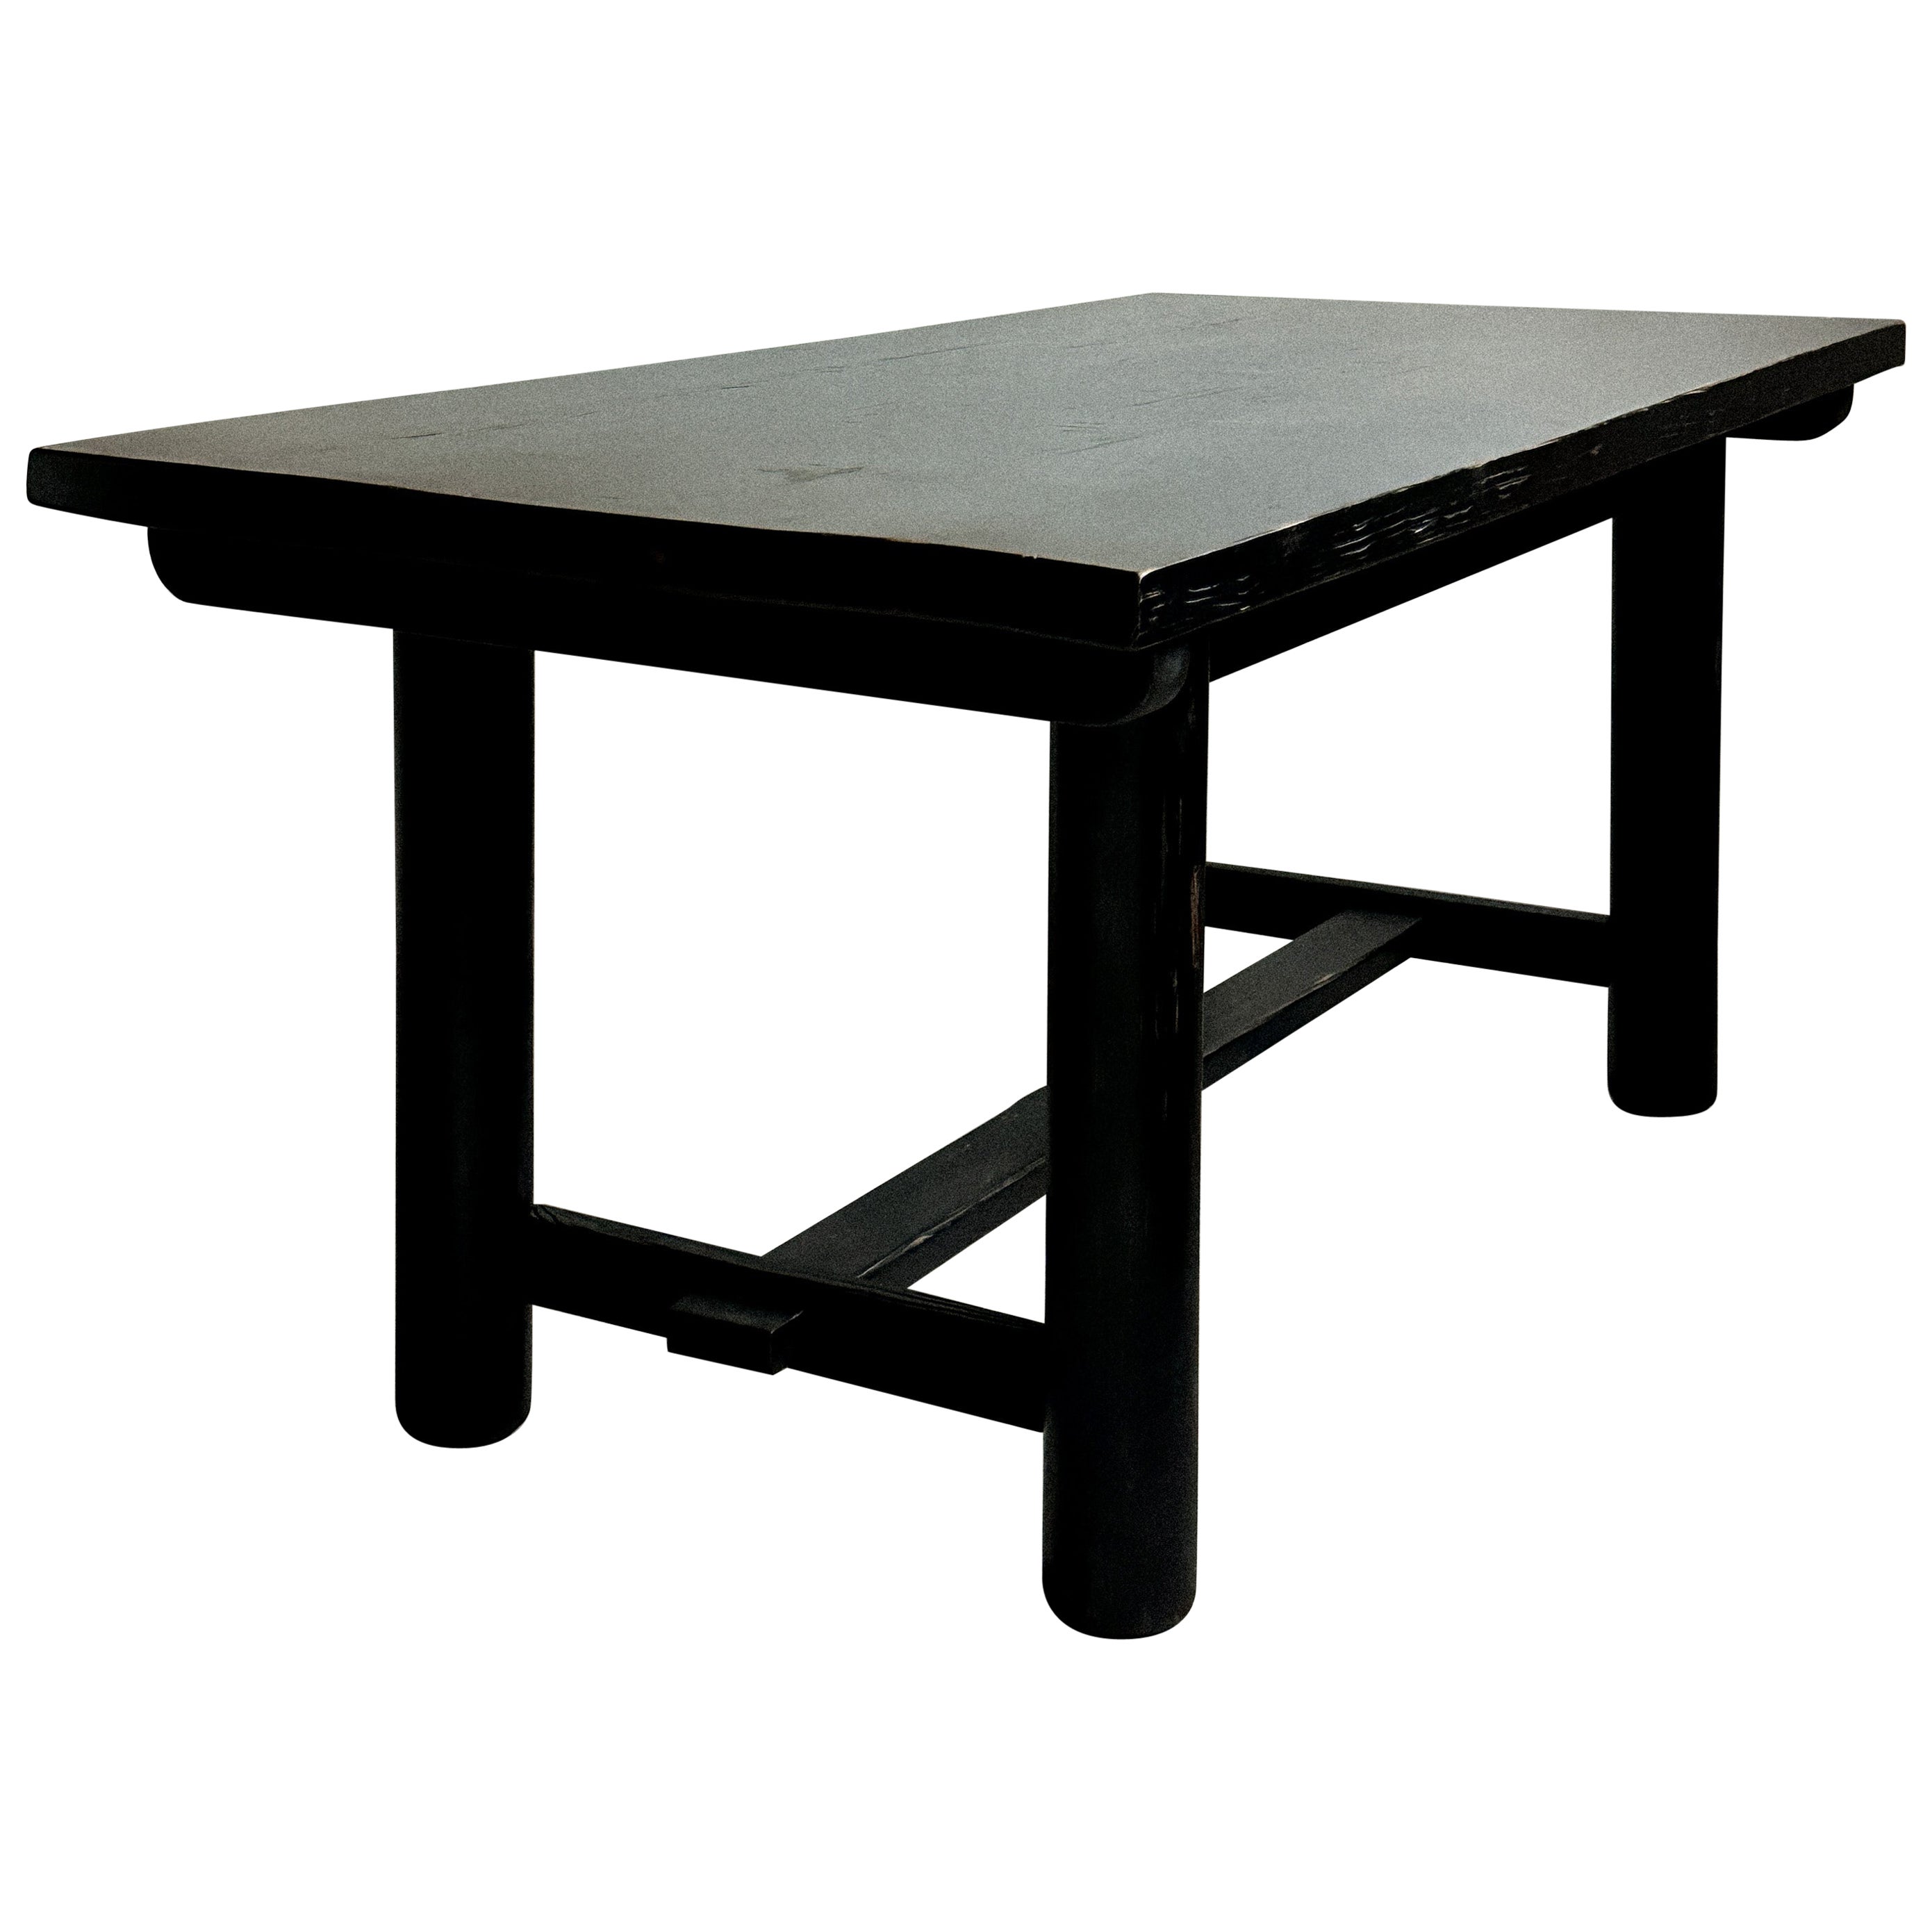 An Ebonized Meribel Dining Table, Wood, Charlotte Perriand (attr.), France 1959 For Sale